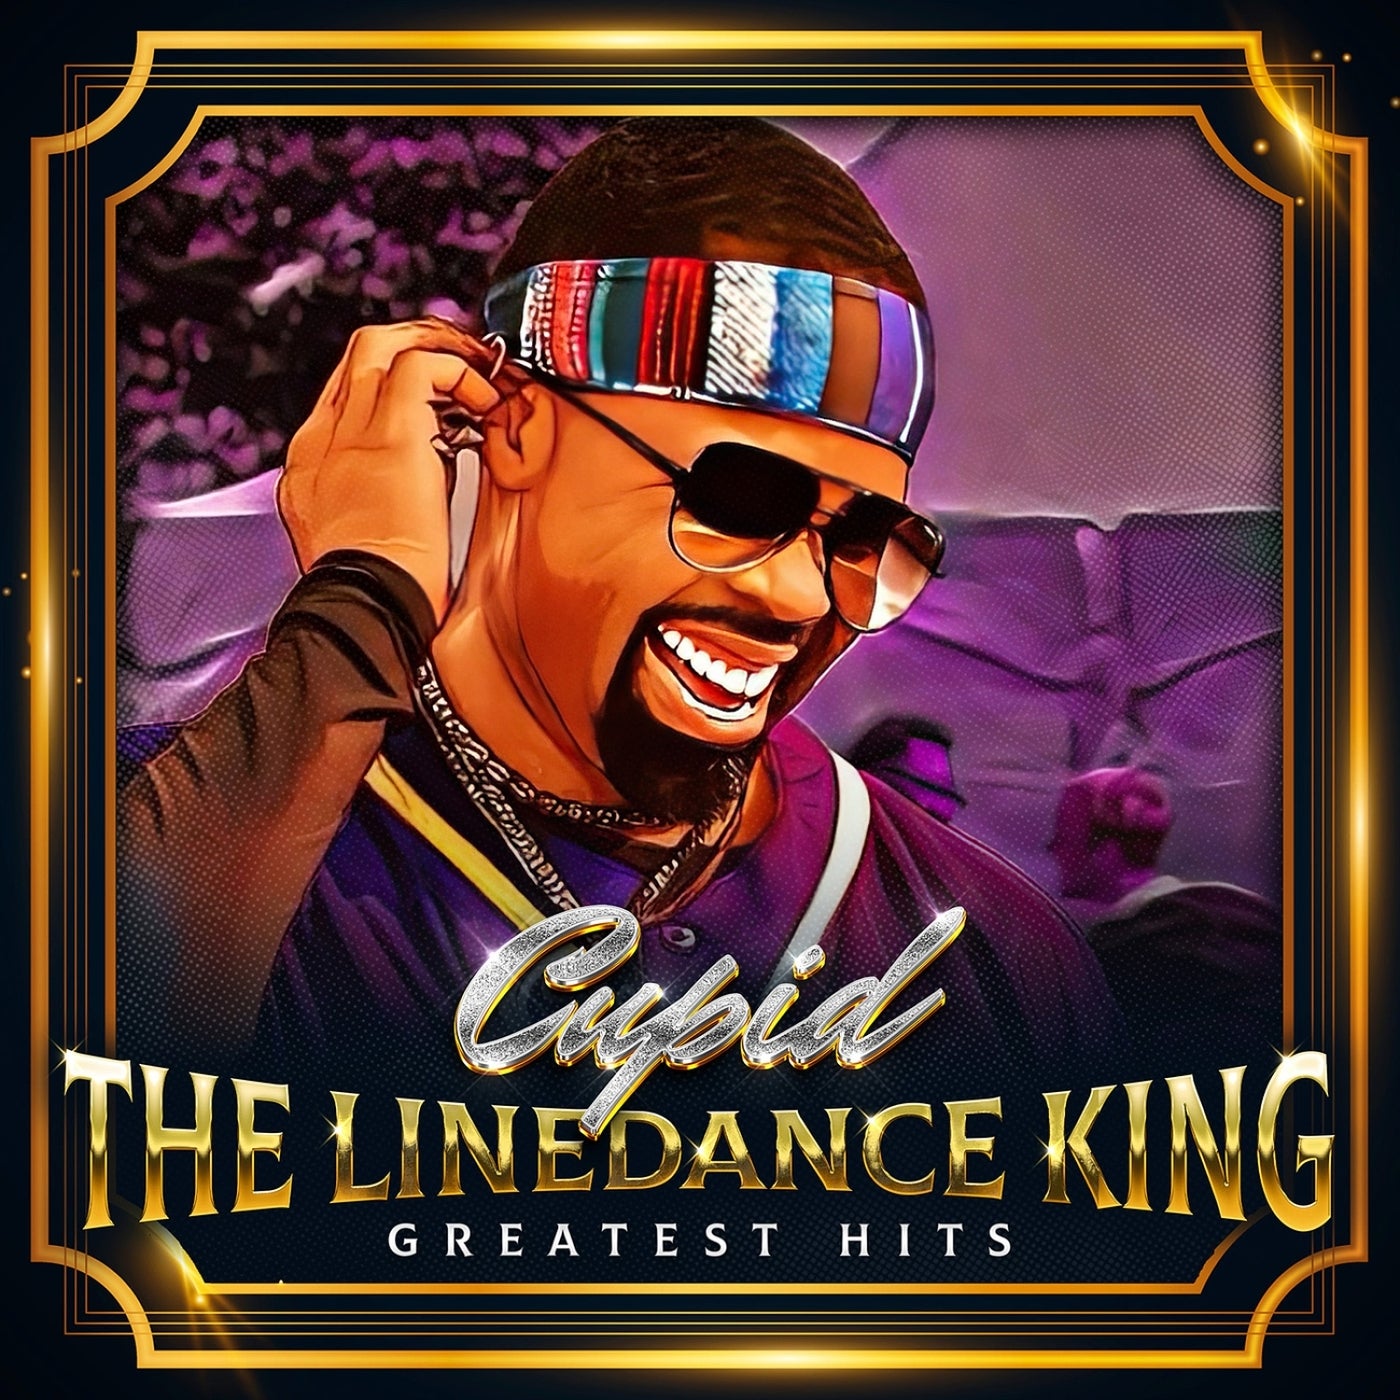 The Linedance King Greatest Hits